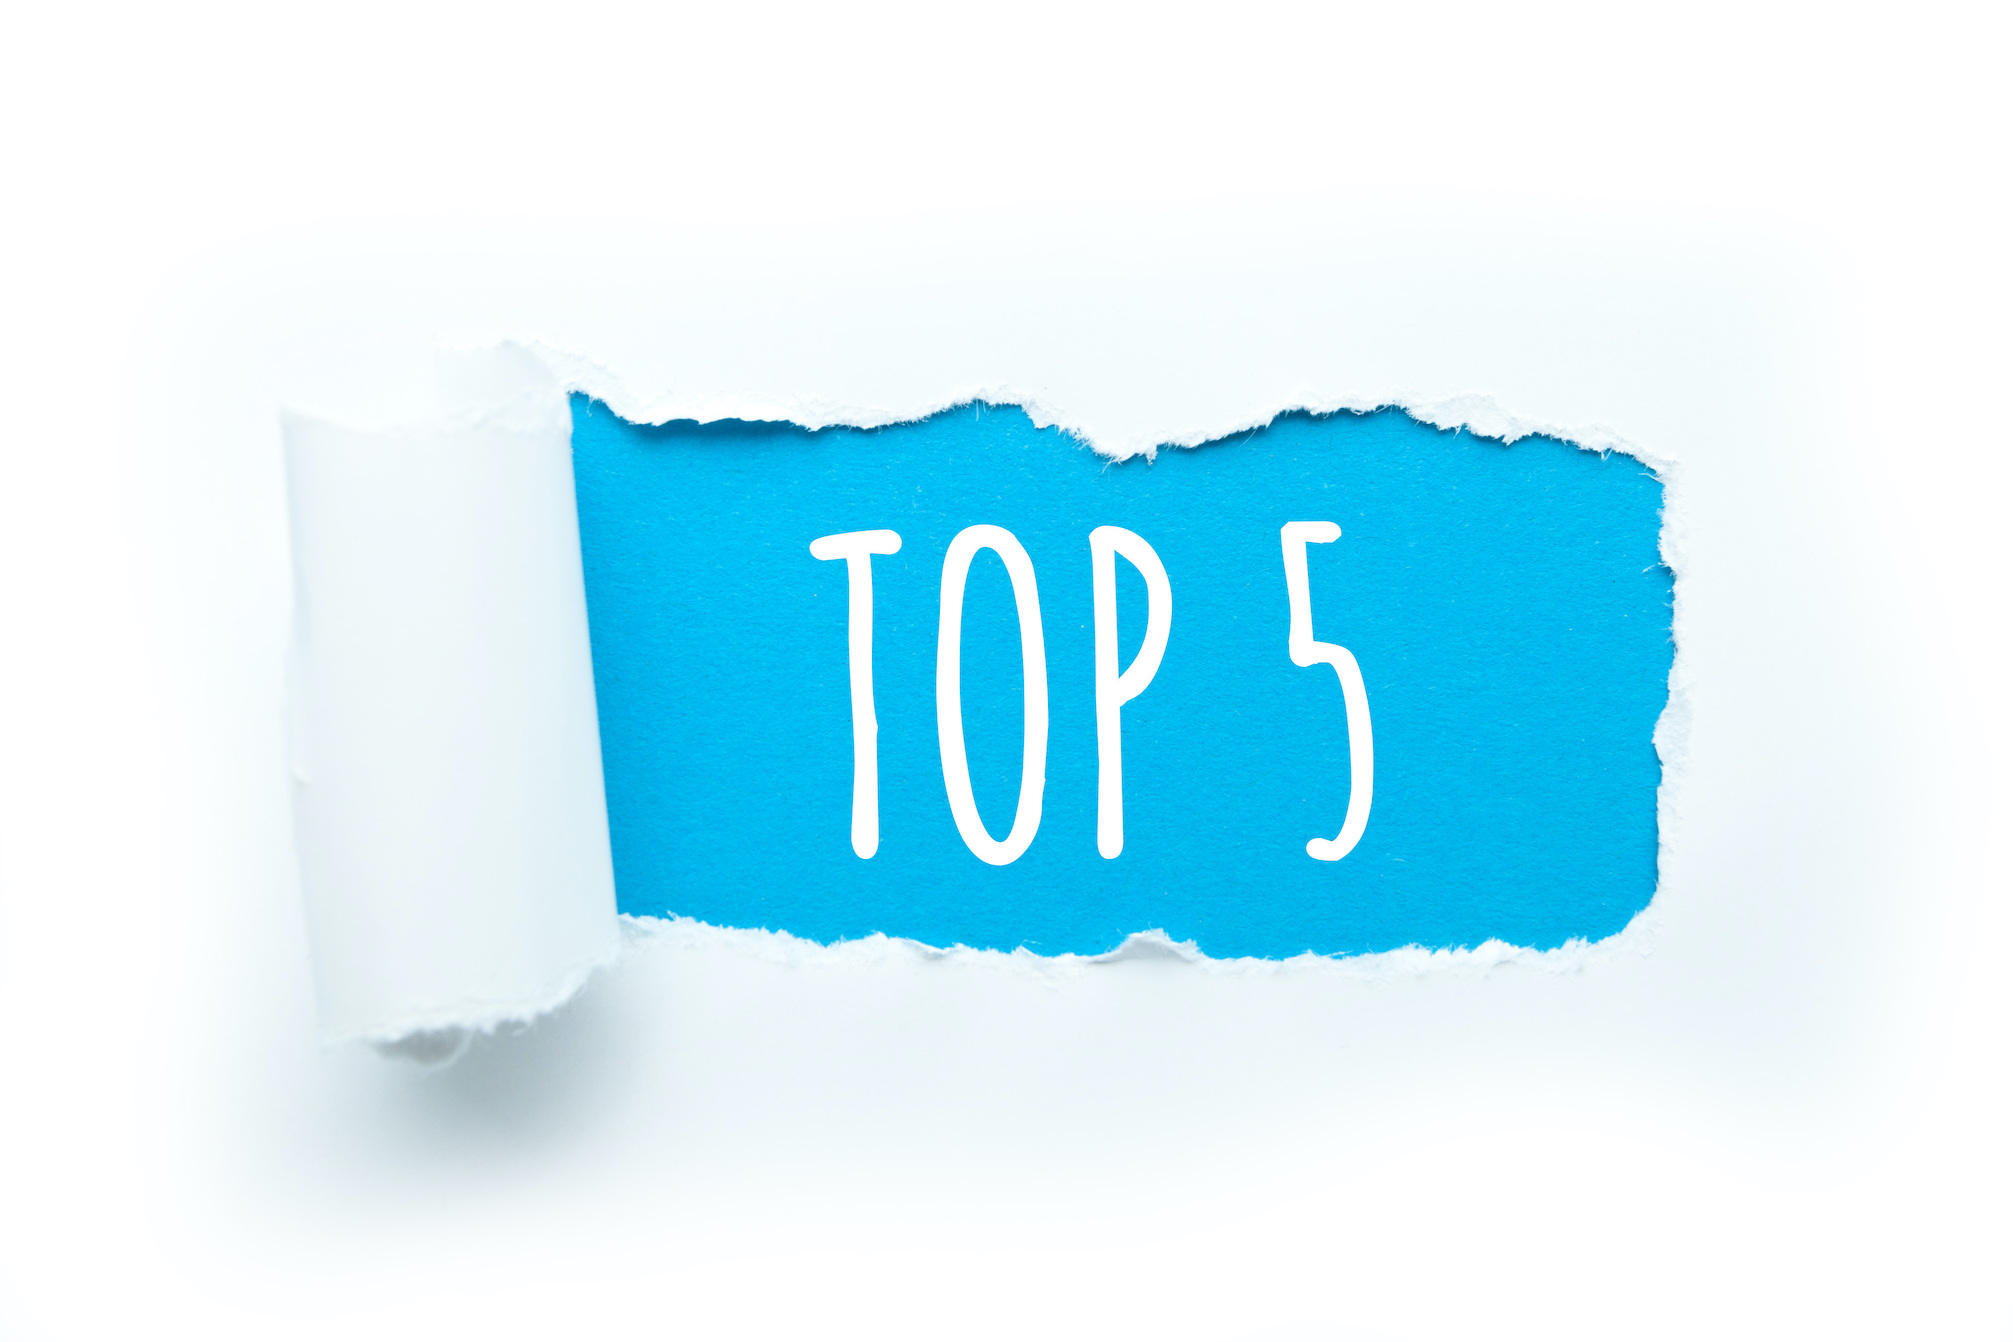 Our Top 5 Keynote Speakers for 2022